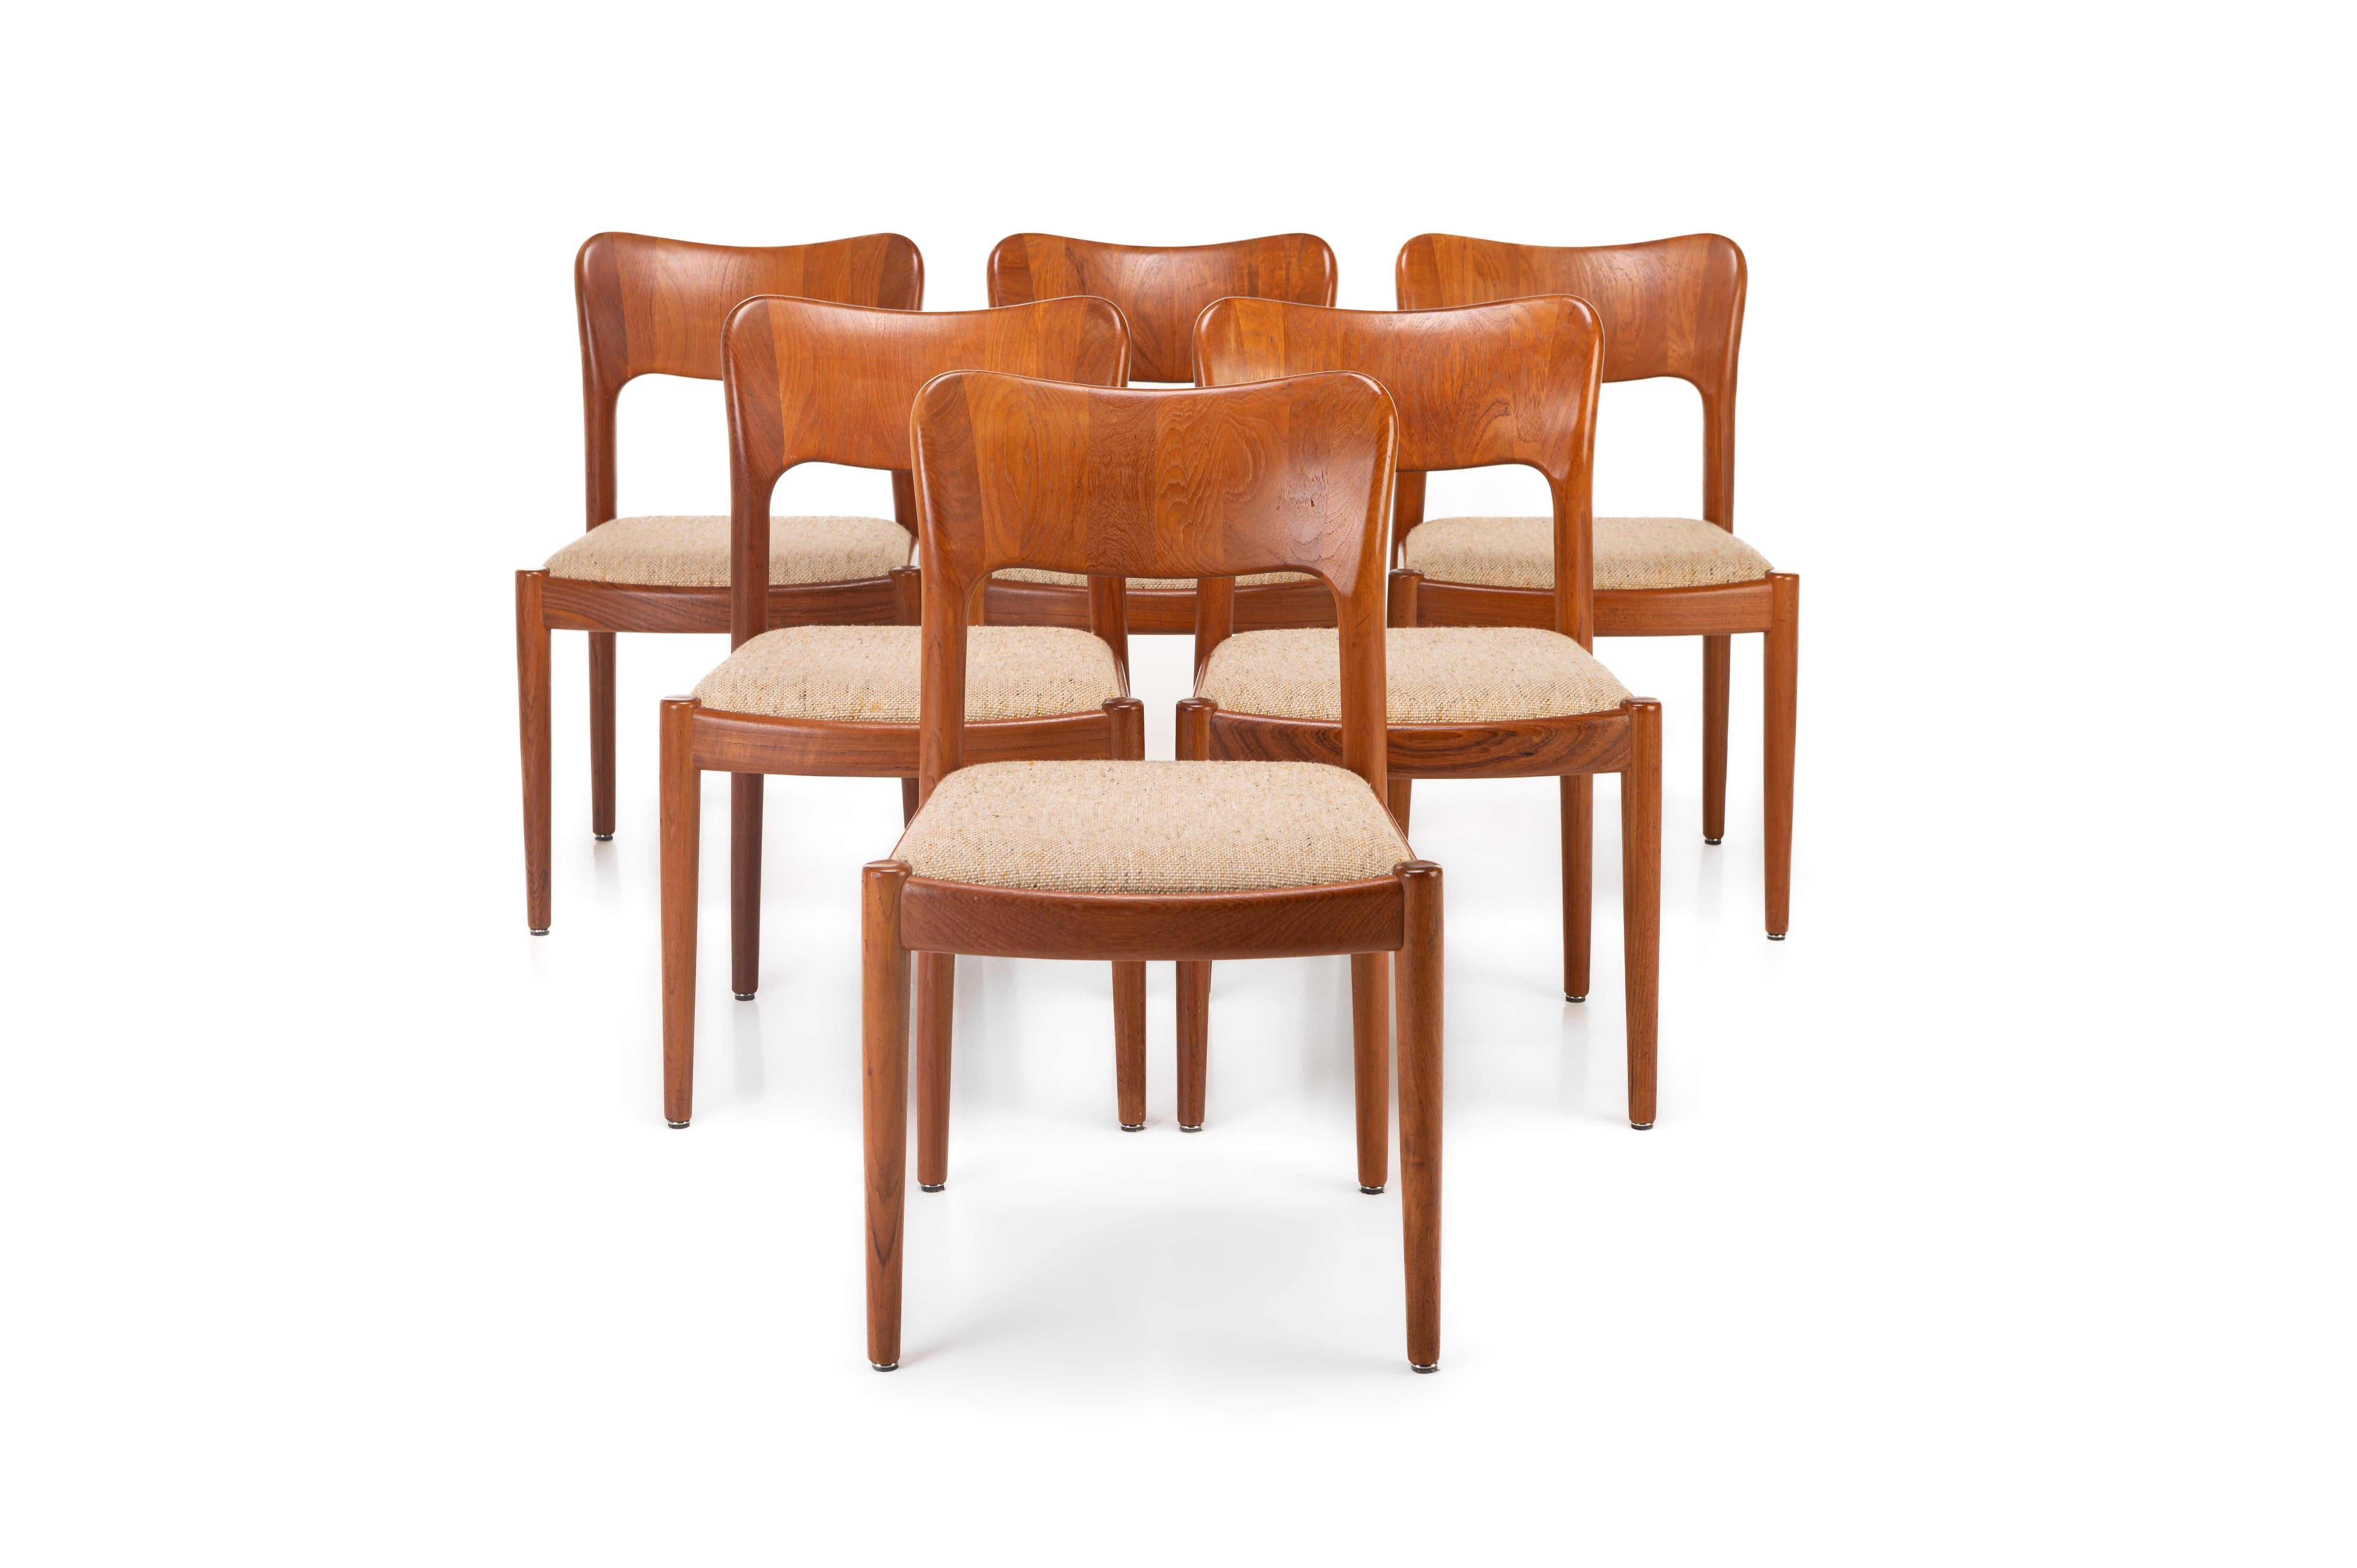 Danish Set of 6 Dining Chairs by Niels Koefoed for Koefoed Hornslet